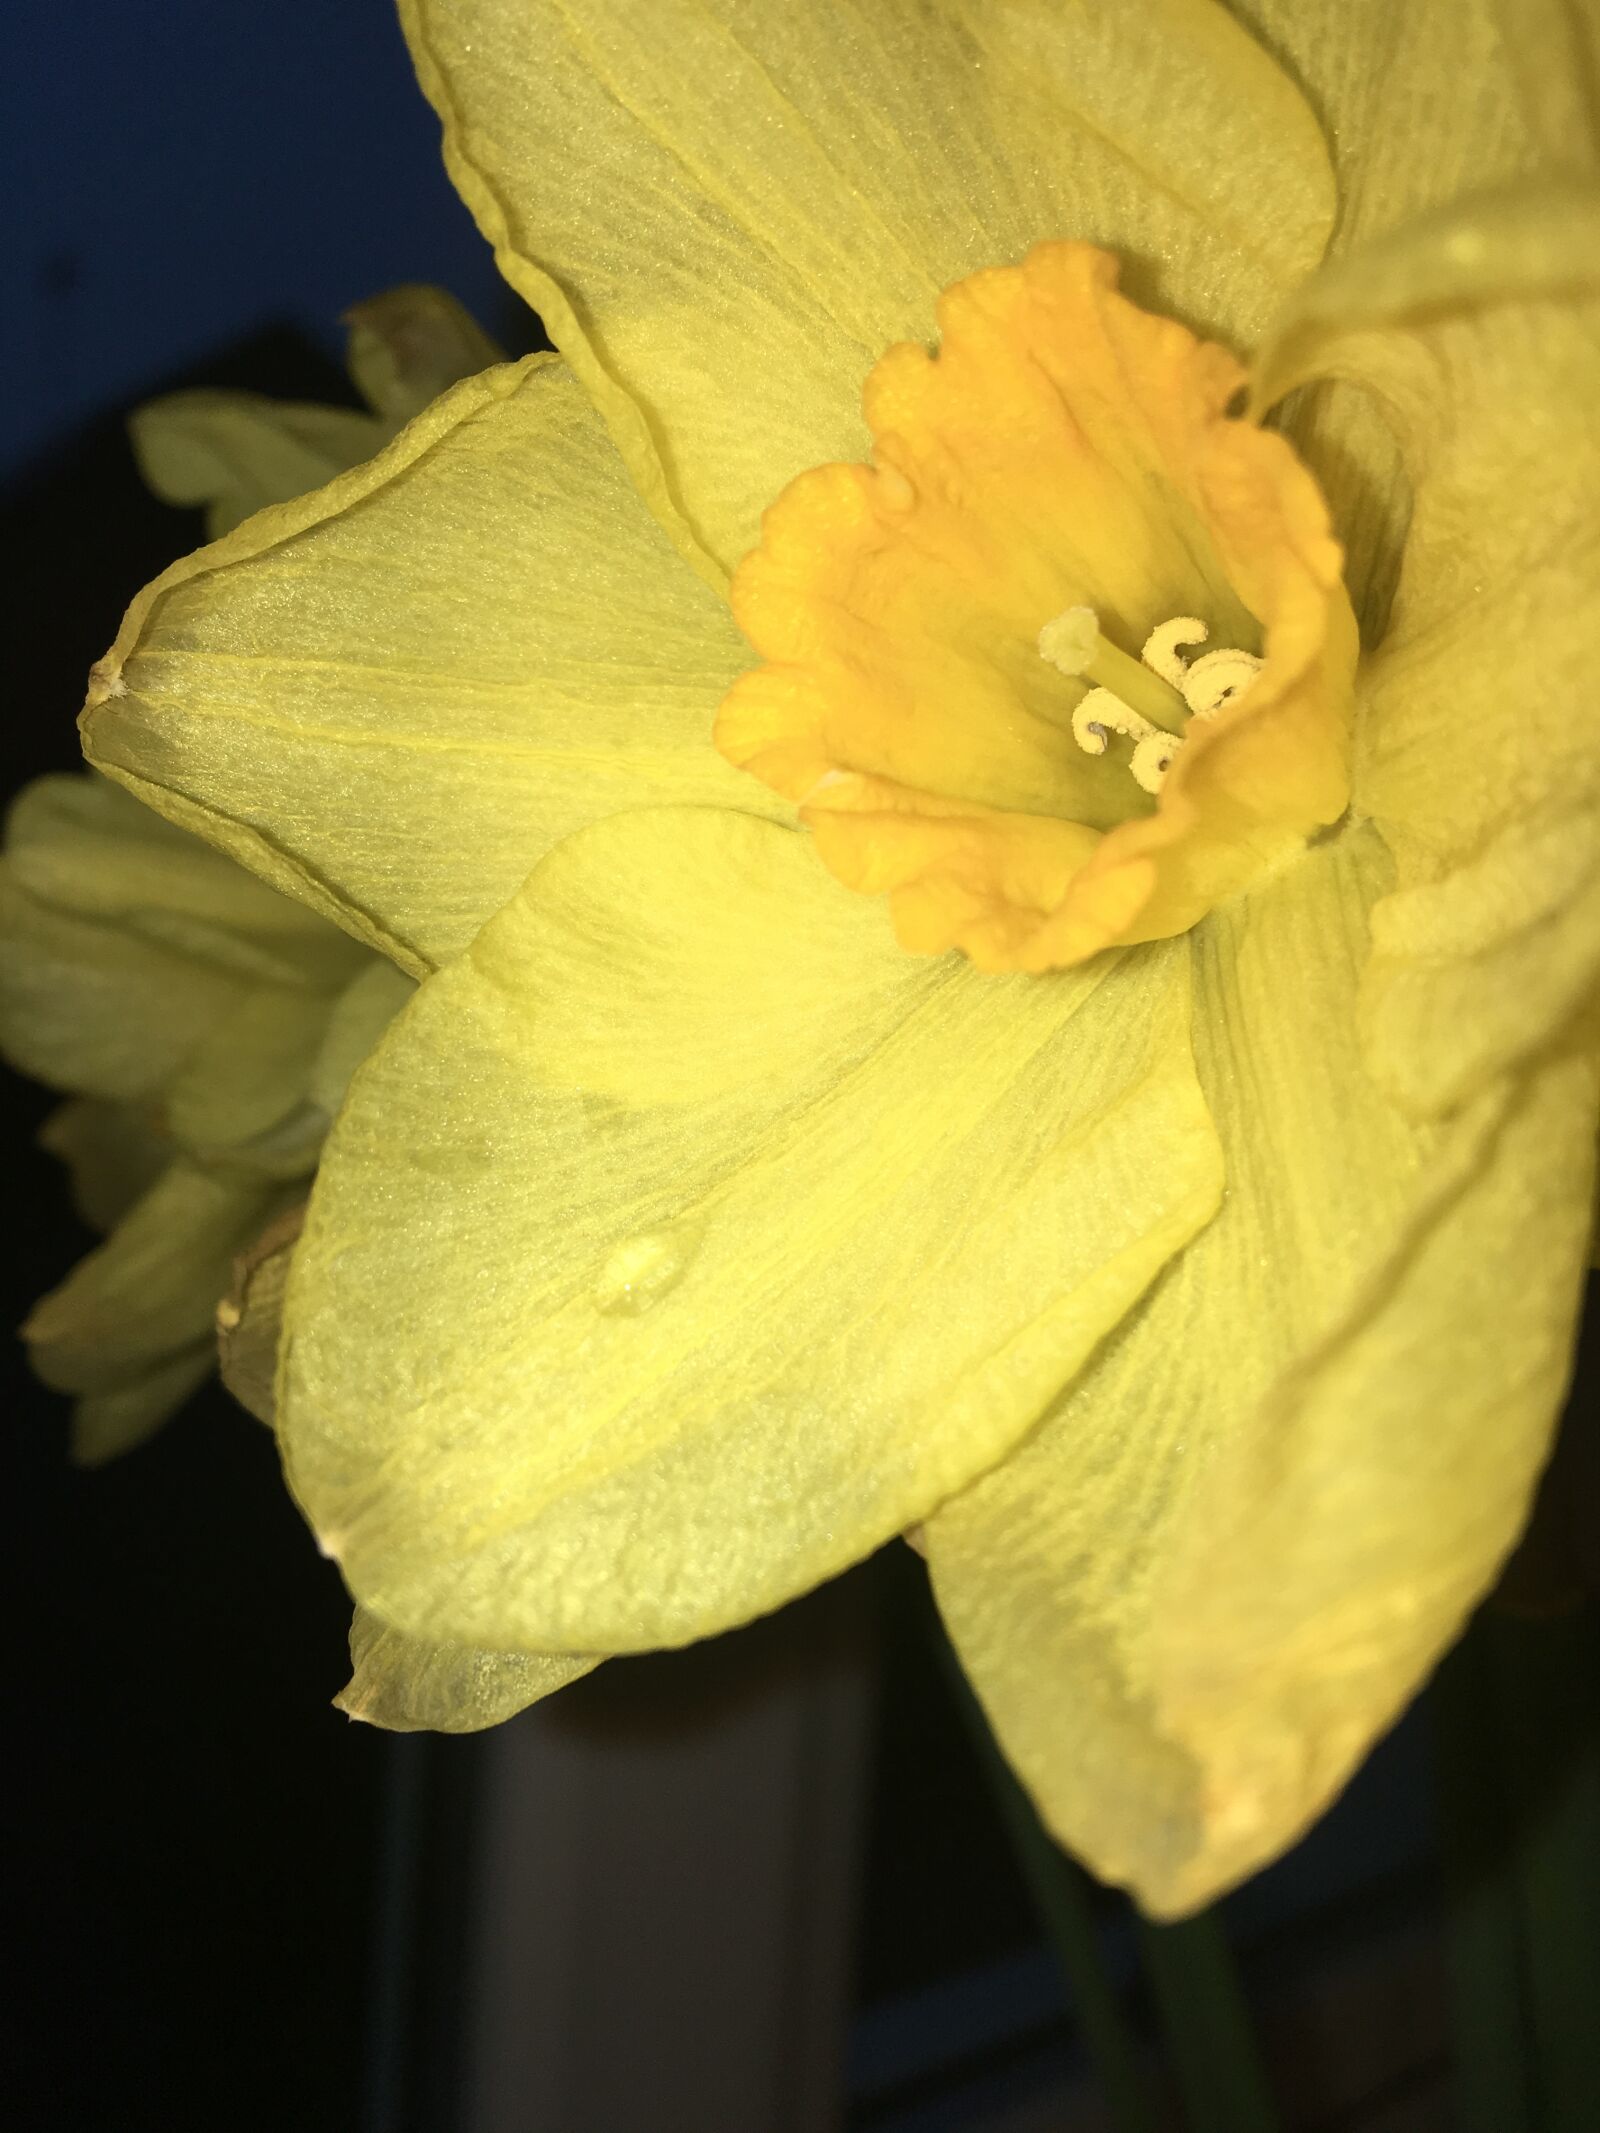 Apple iPhone 6s sample photo. Flower, daffodil, nature photography